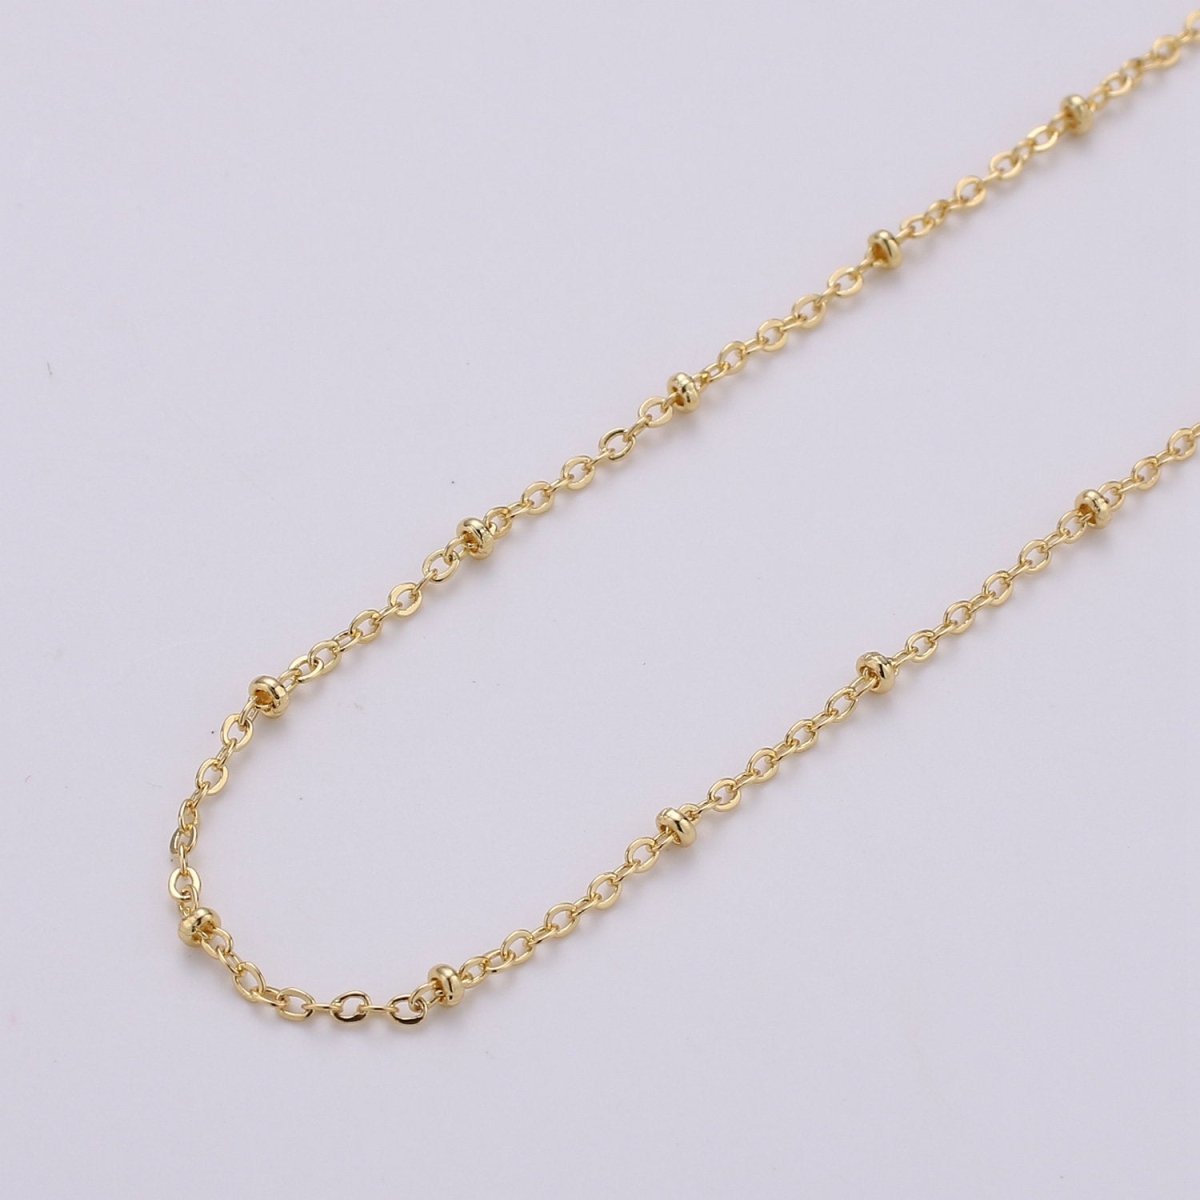 24K Gold Filled Satellite Chain - Gold Filled Beaded Chain - Satellite Chain By the Yard- Unfinished Chain for Necklace Rosary | ROLL-133 - DLUXCA